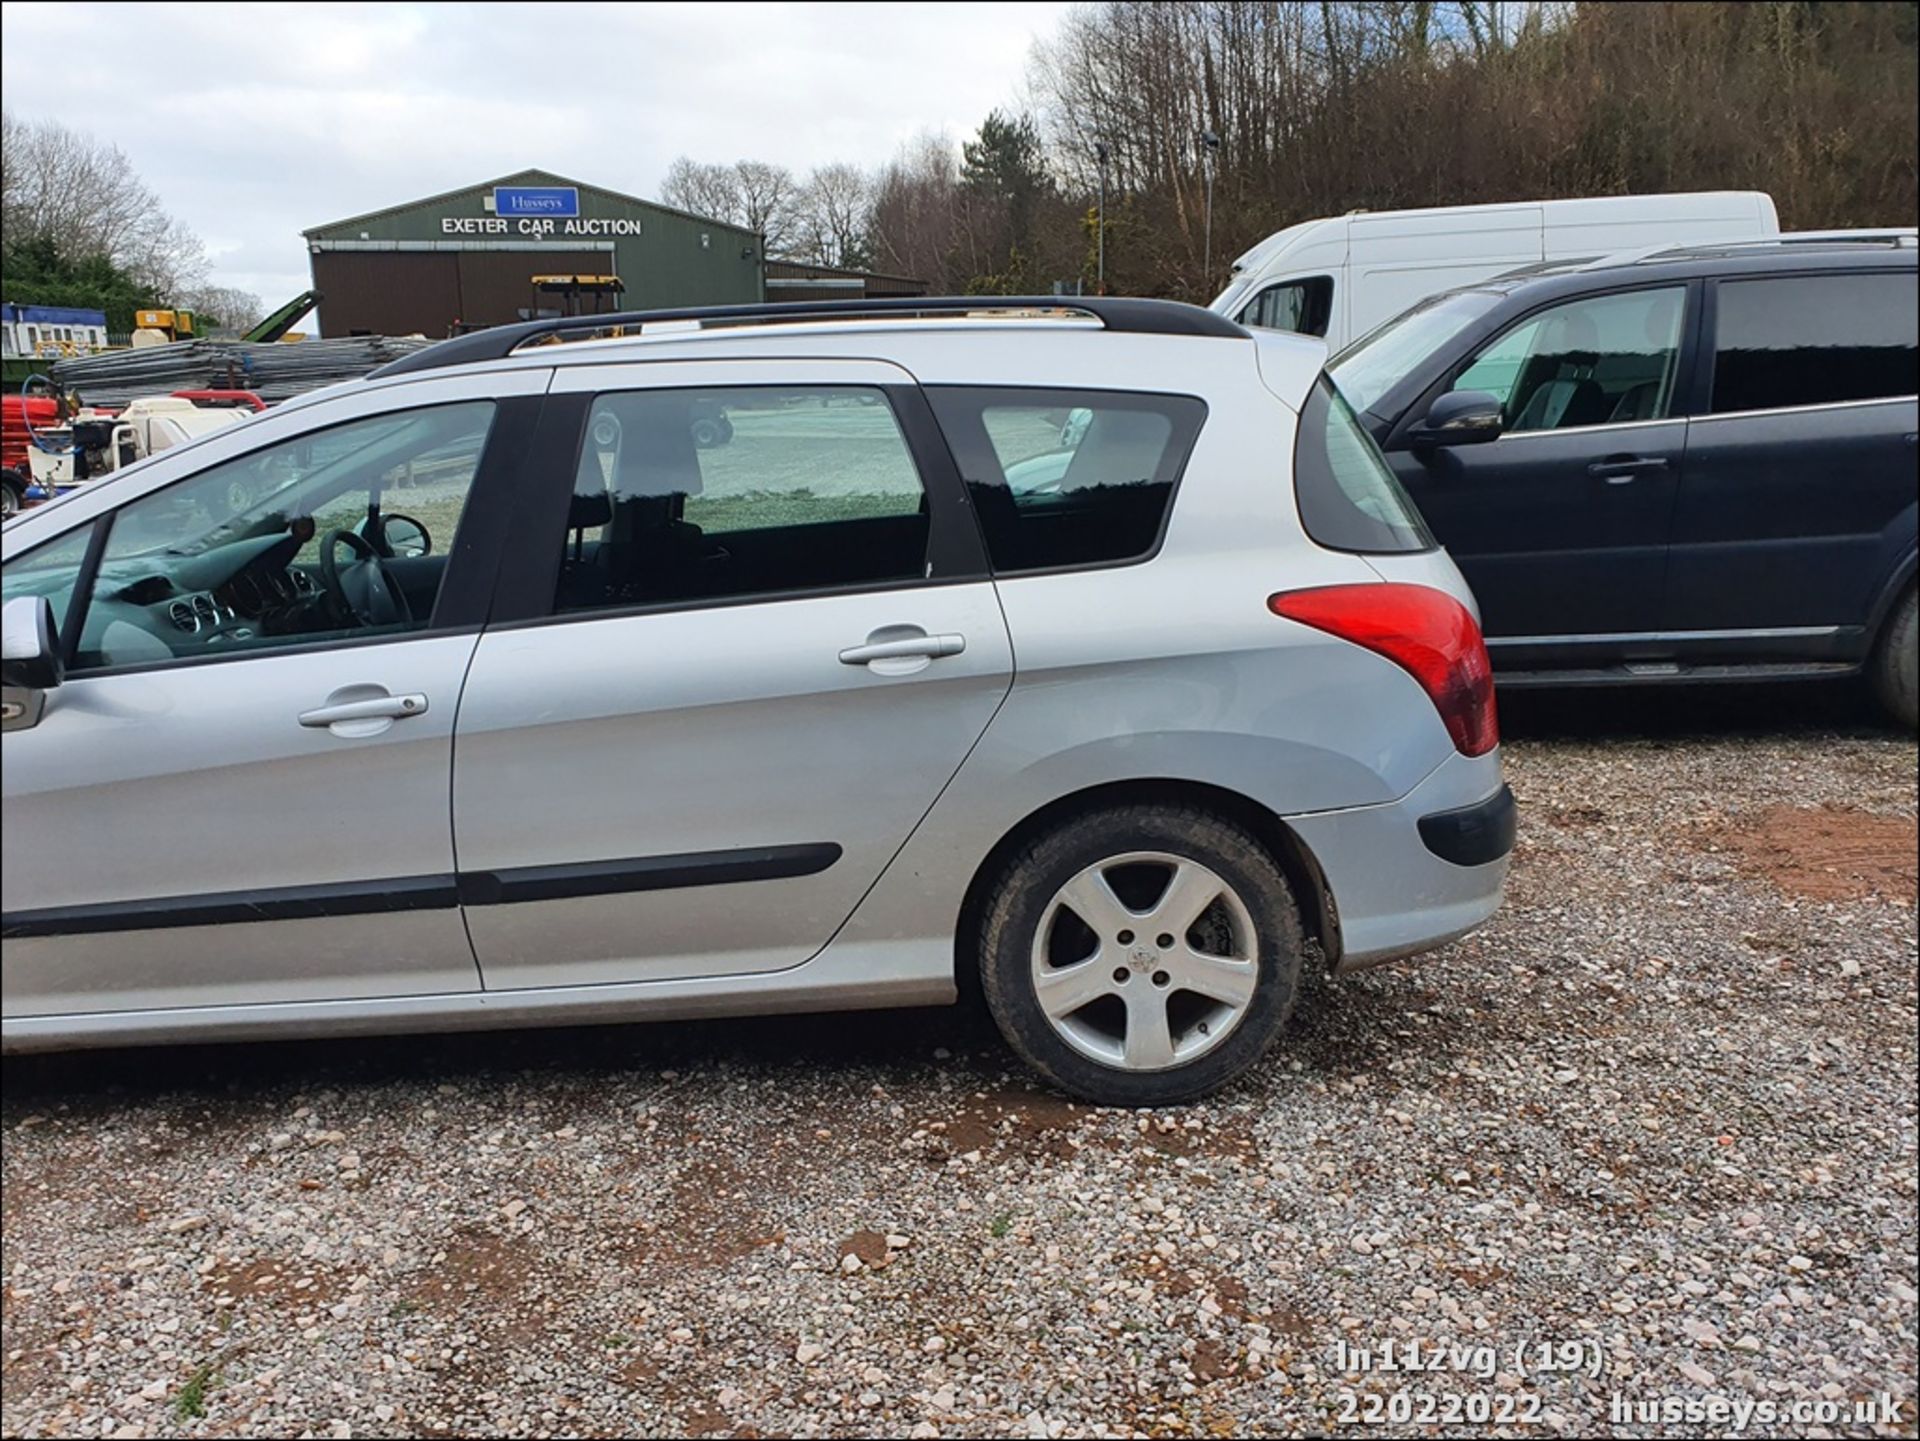 11/11 PEUGEOT 308 S SW HDI 92 - 1560cc 5dr Estate (Silver, 115k) - Image 19 of 46